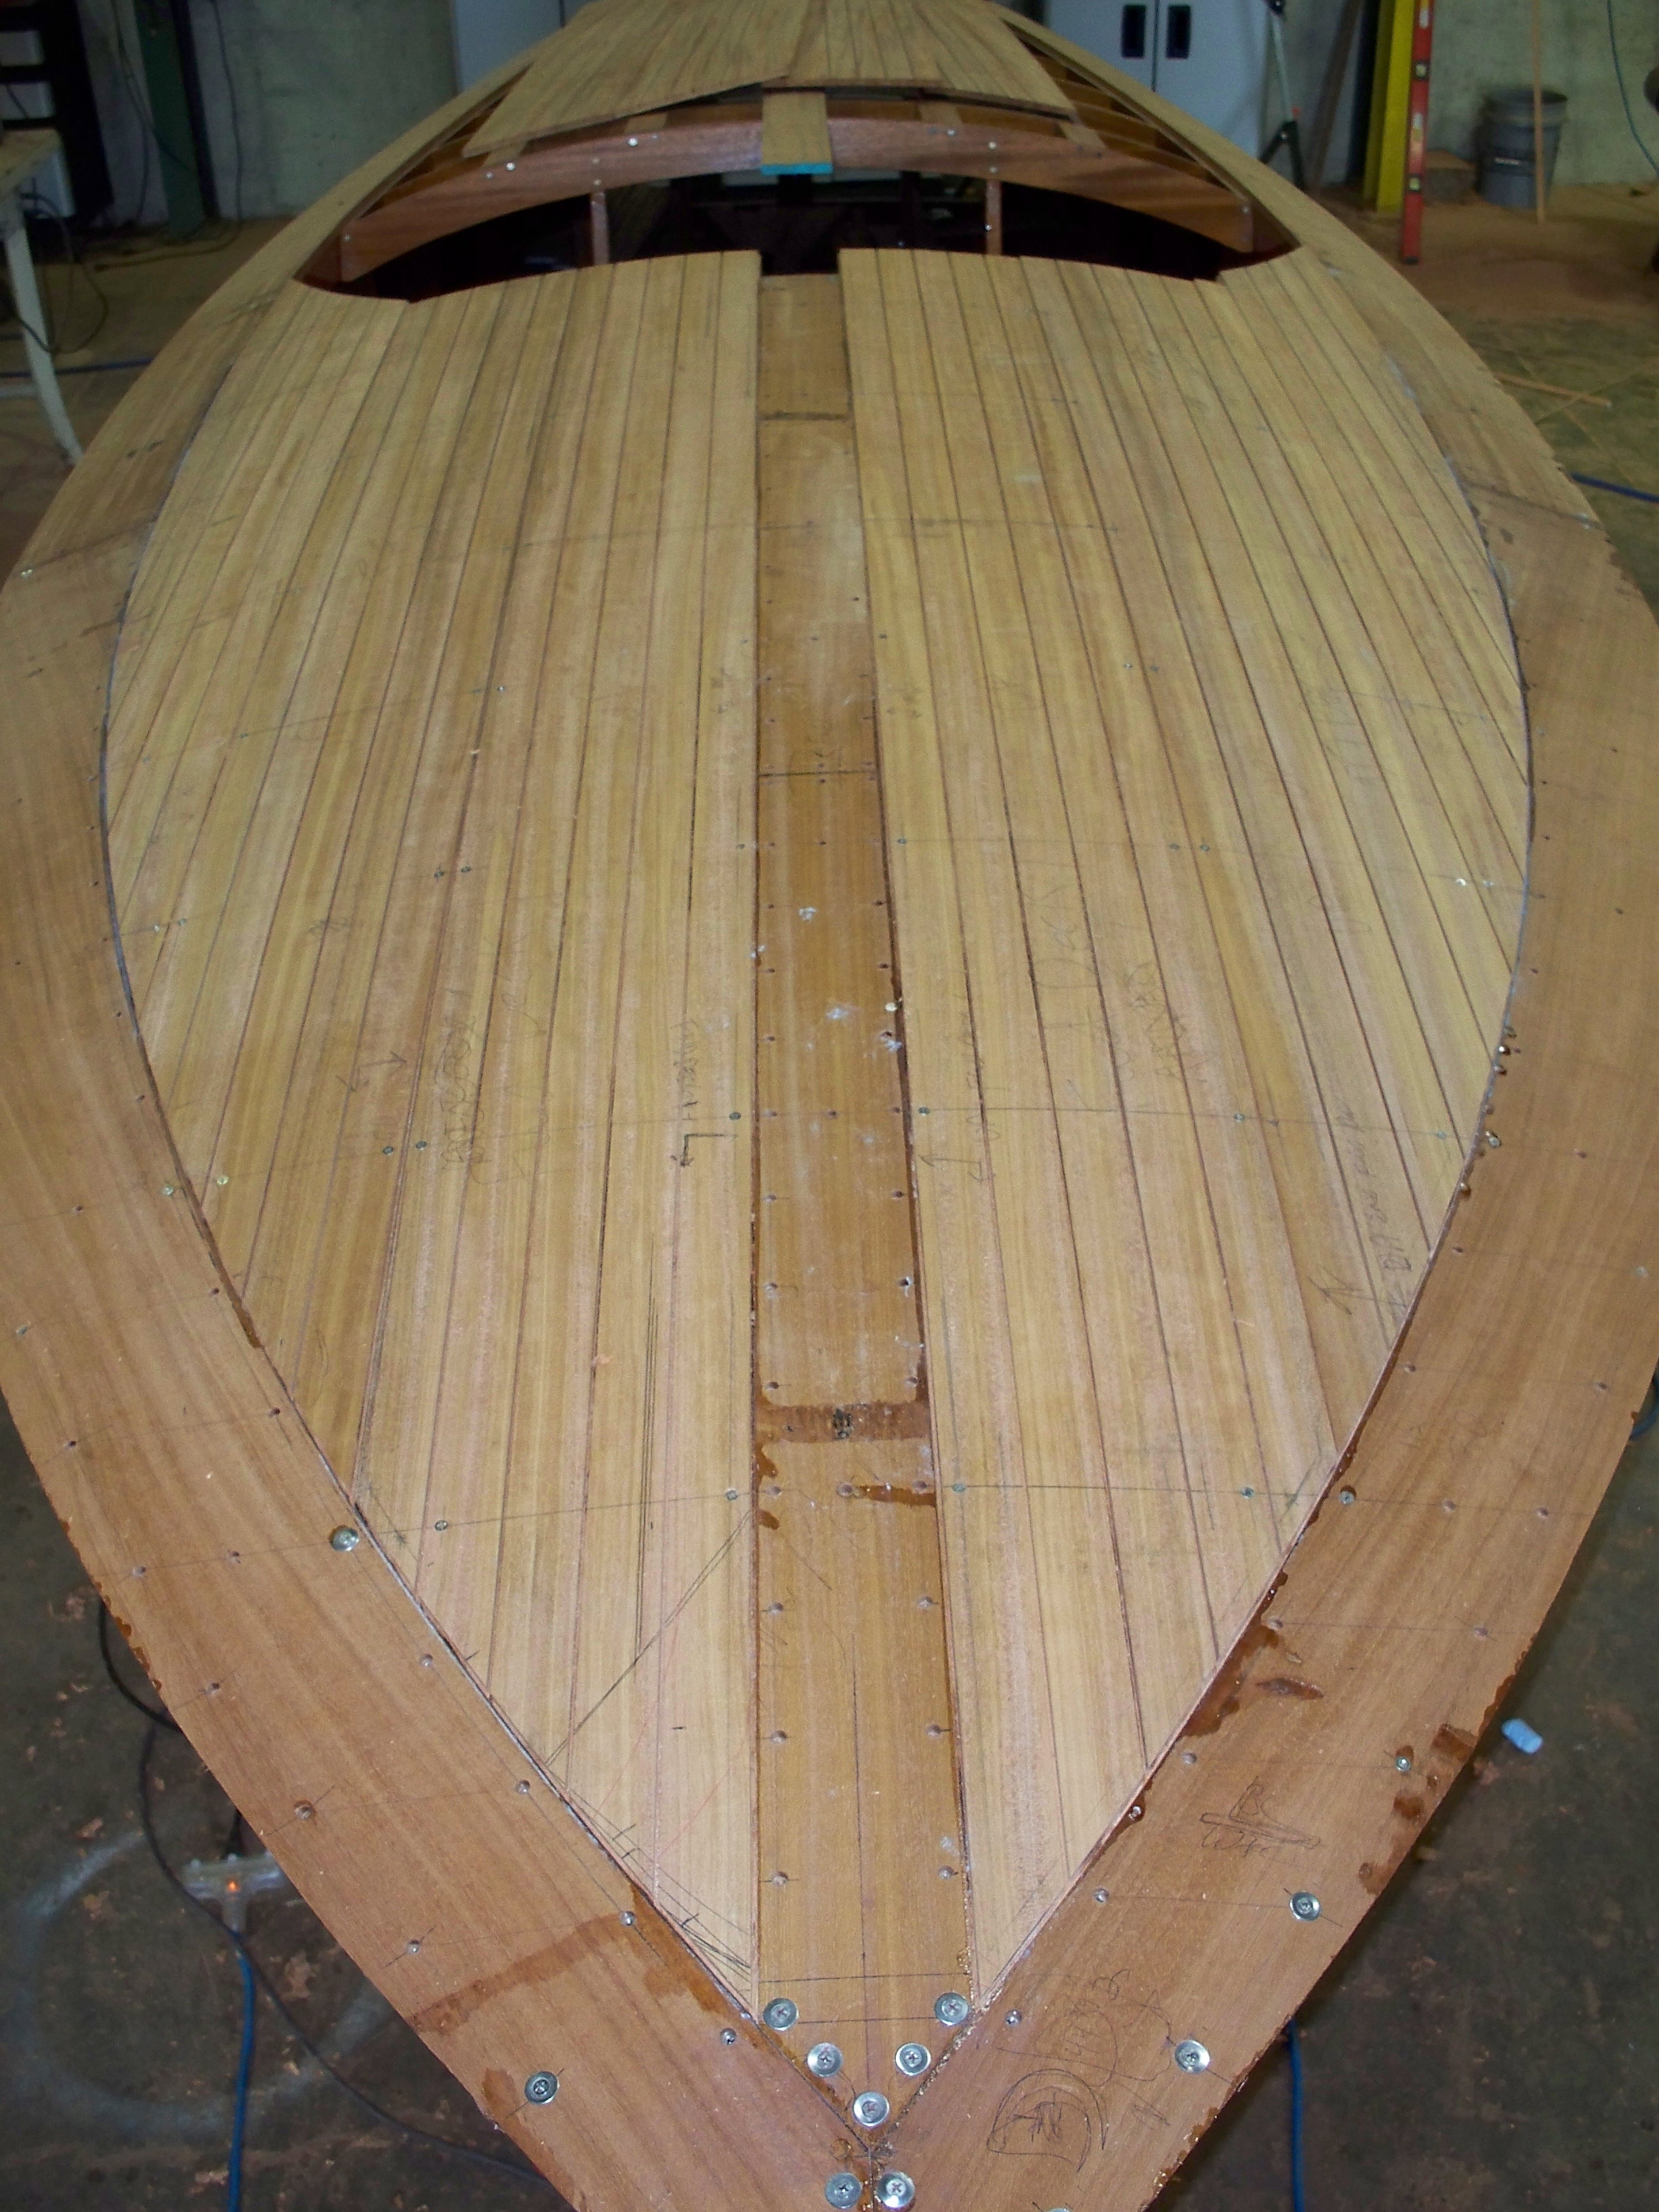 19â€² special race boat decking